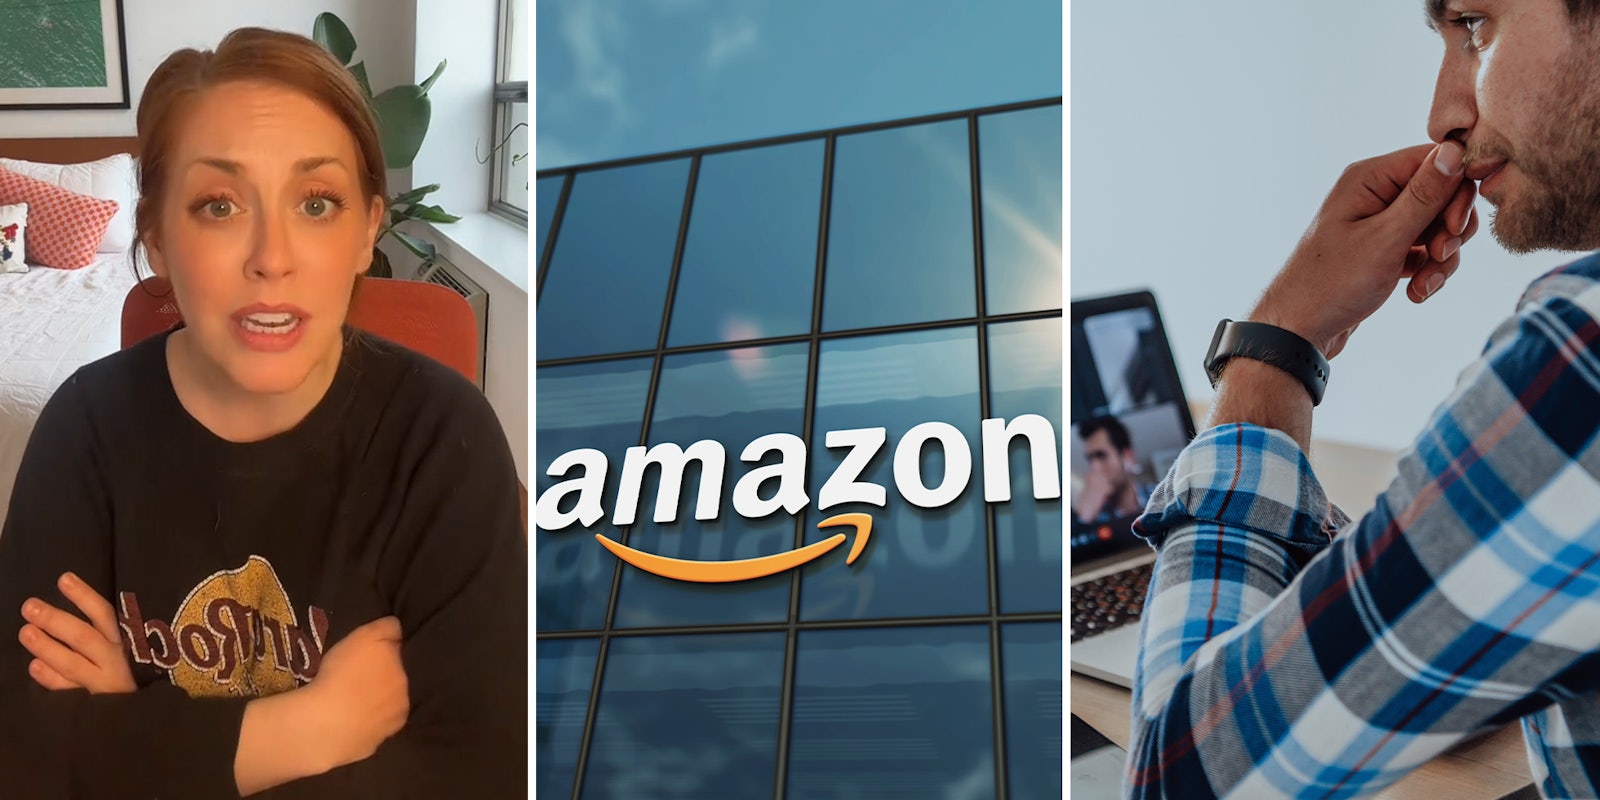 Laid-off worker wonders why Amazon insists on doing it via Zoom